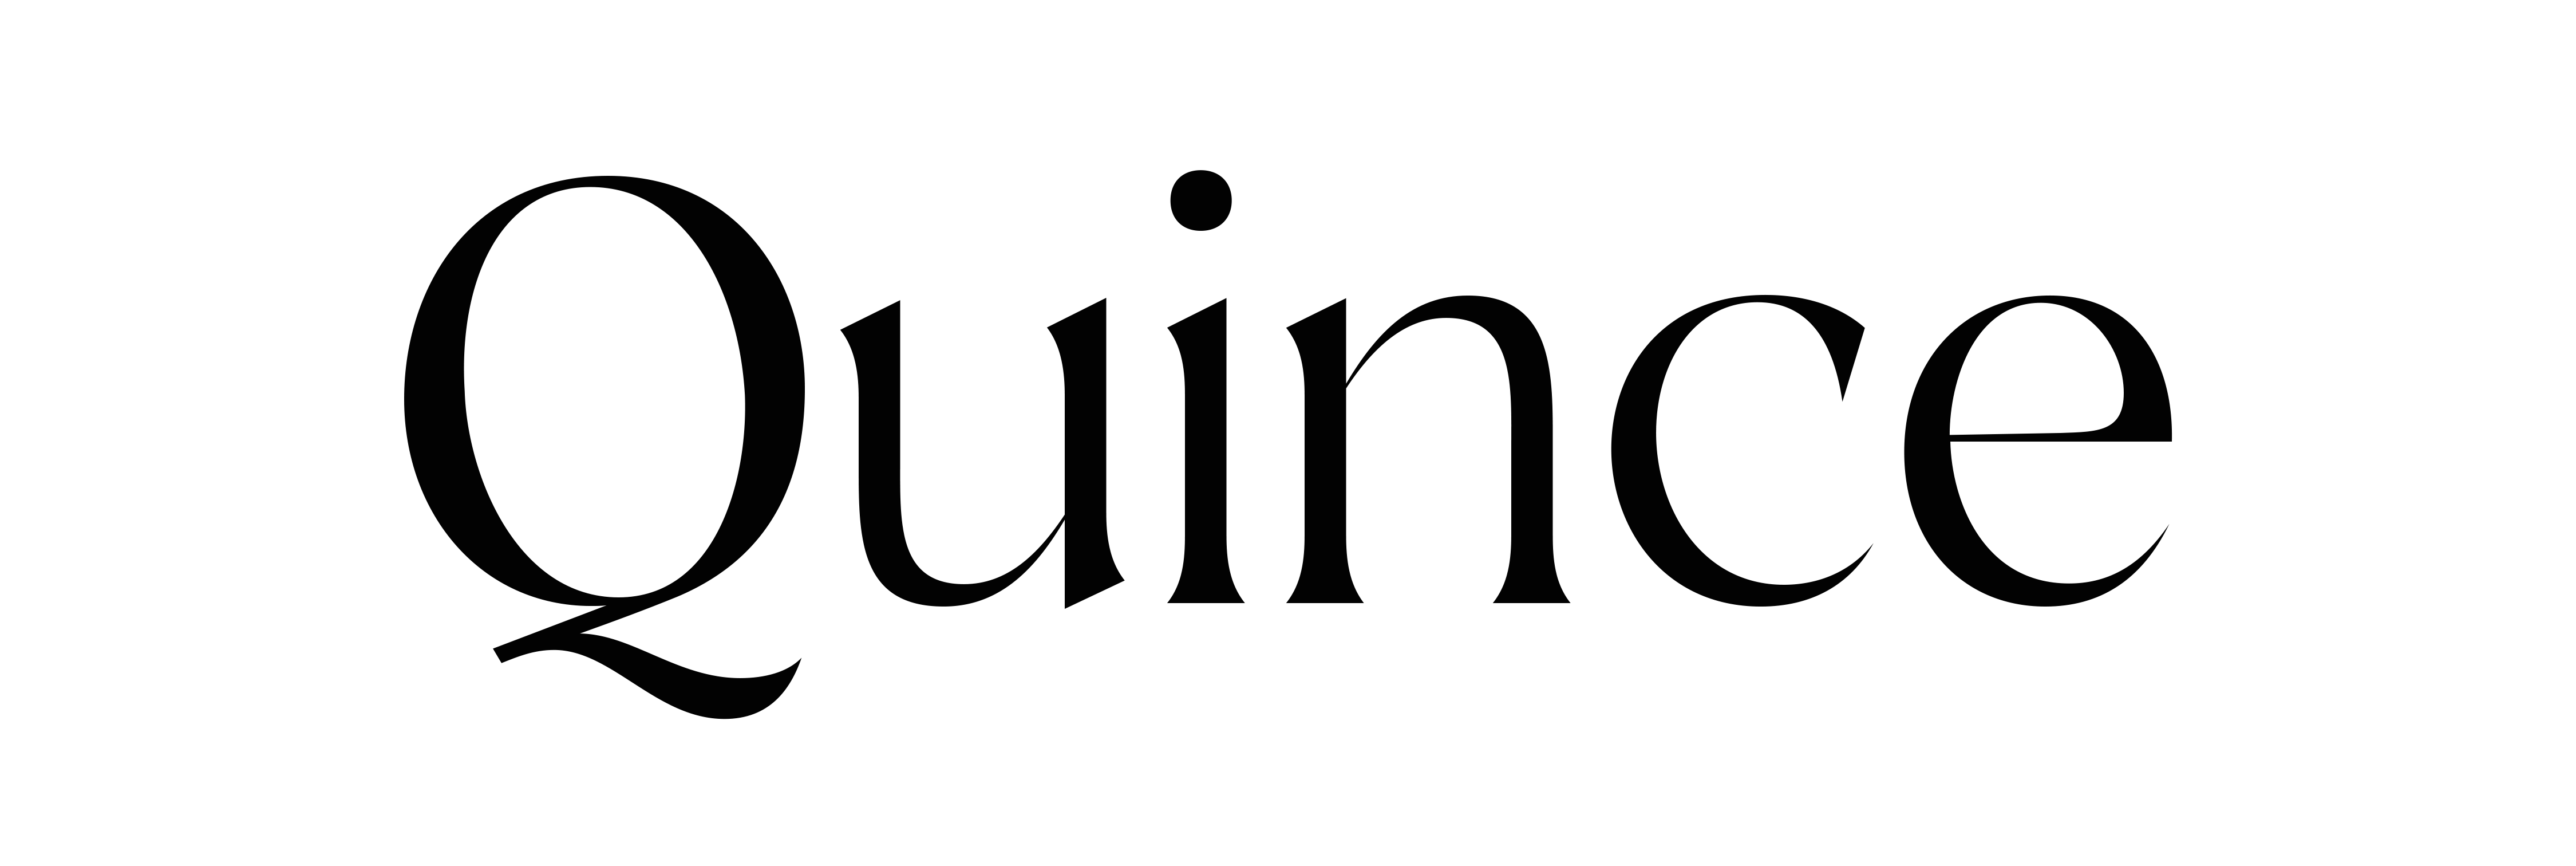 Quince logo bigger file.png